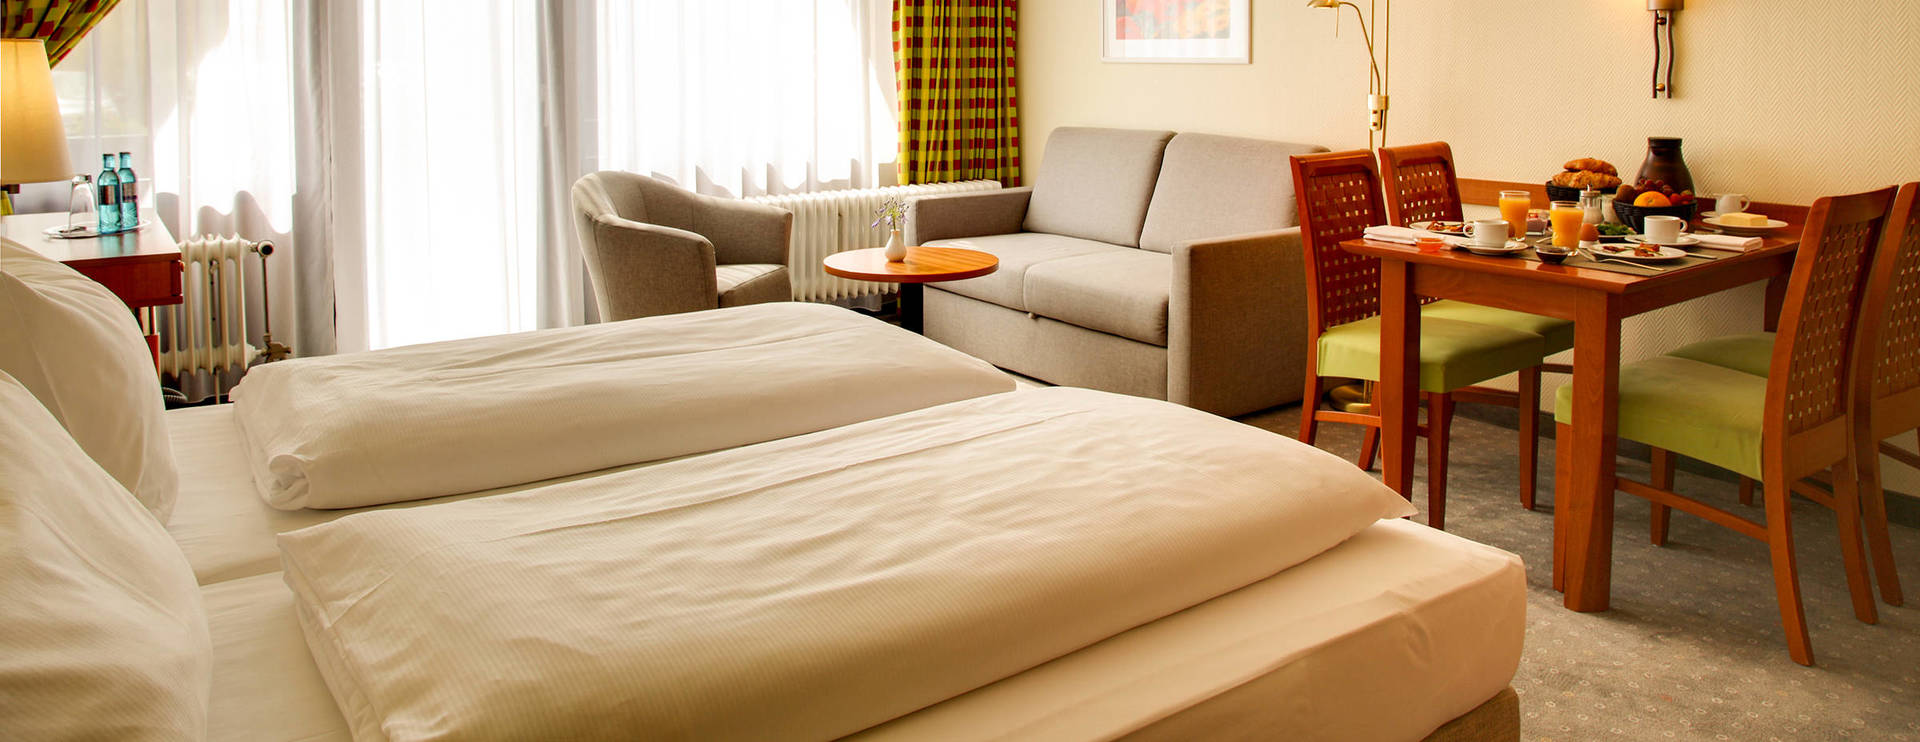 A modern hotelroom at the H+ Hotel Willingen - Official website